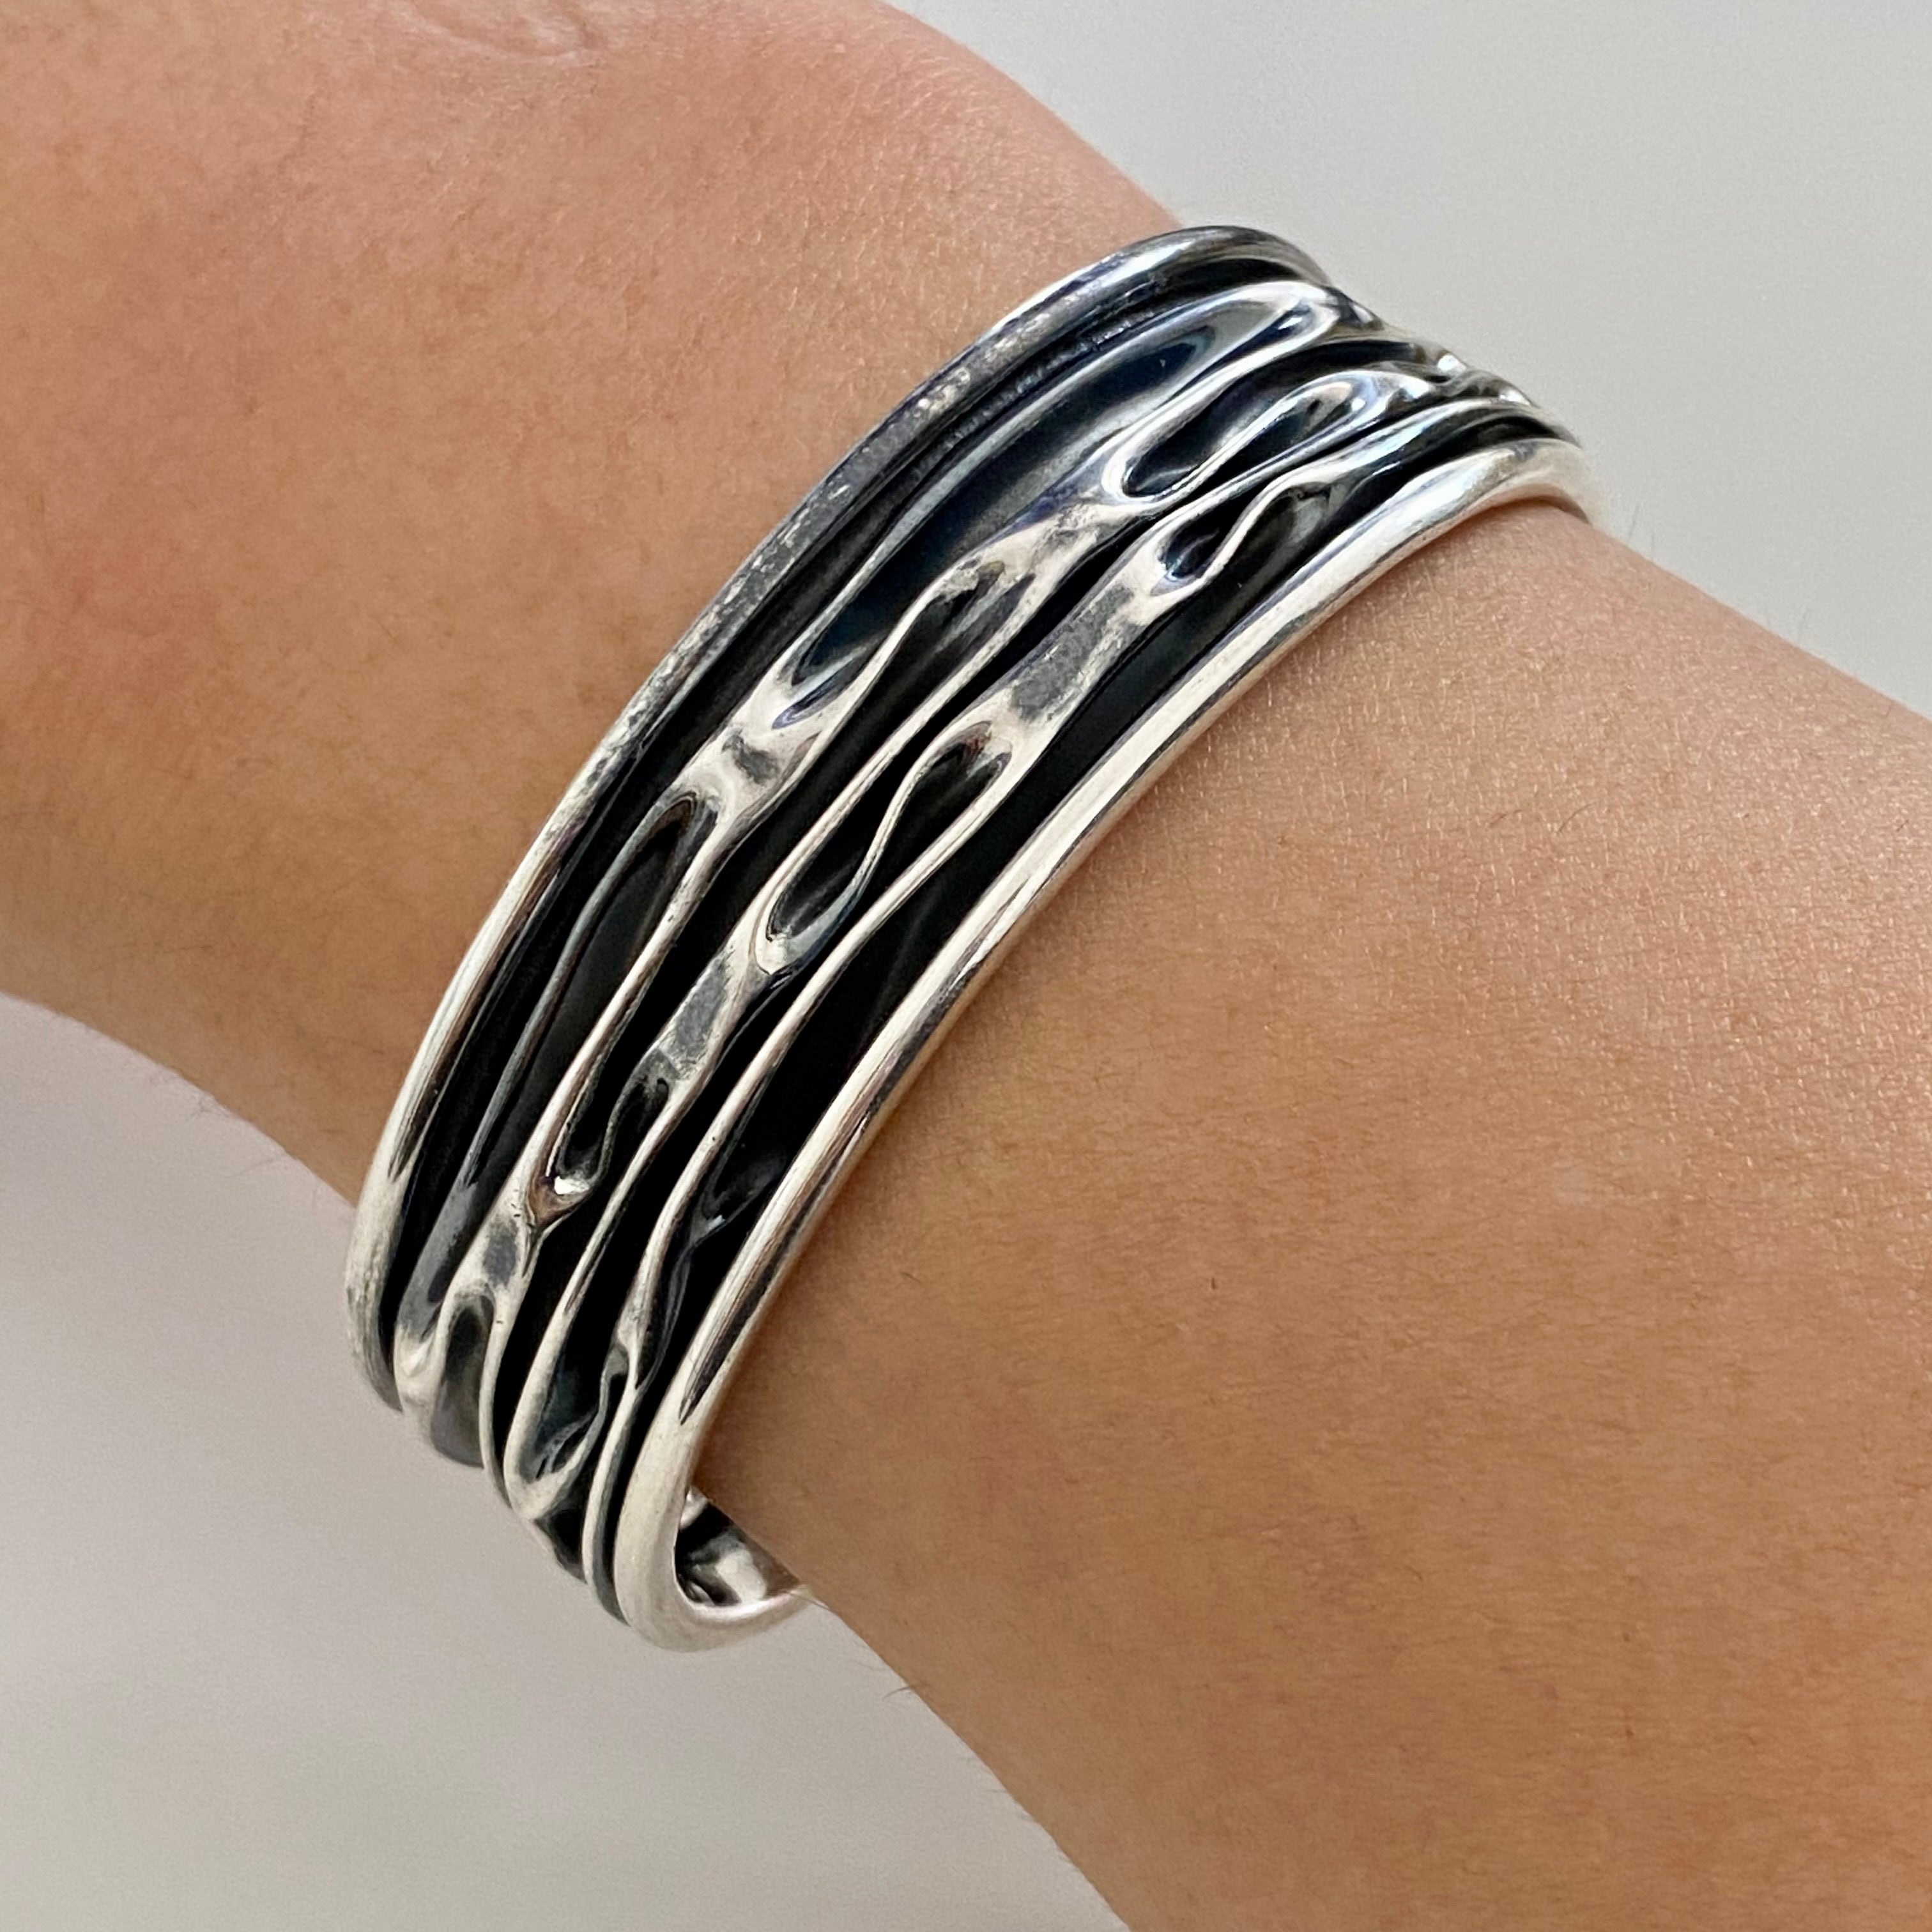 Oxidised Sterling Silver Textured Patterned Cuff - Narrow